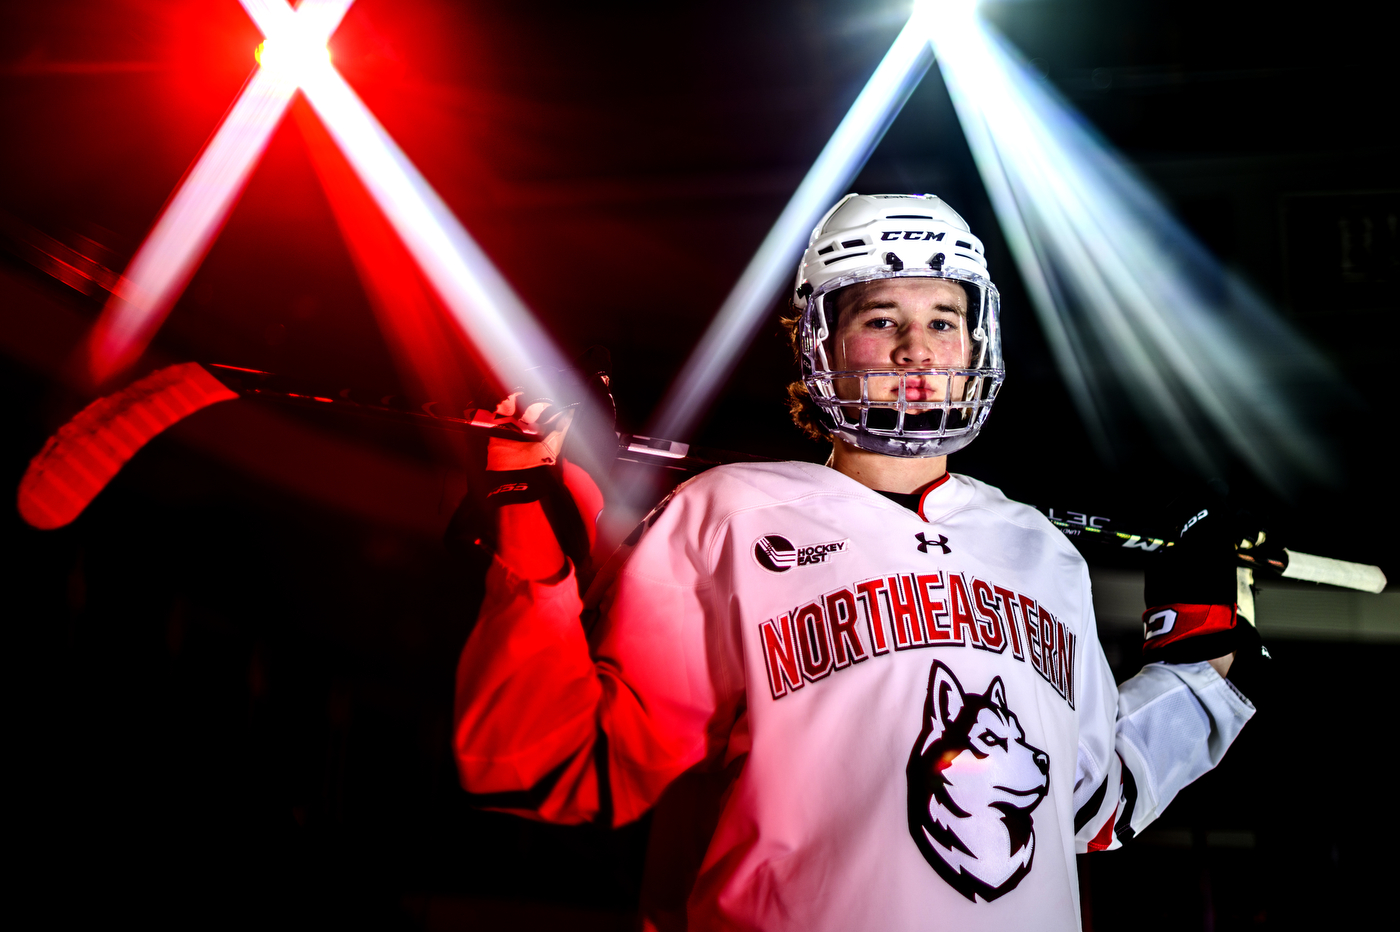 Cam Lundon poses holding a hockey stick over his shoulders wearing a Northeastern hockey jersey and helmet